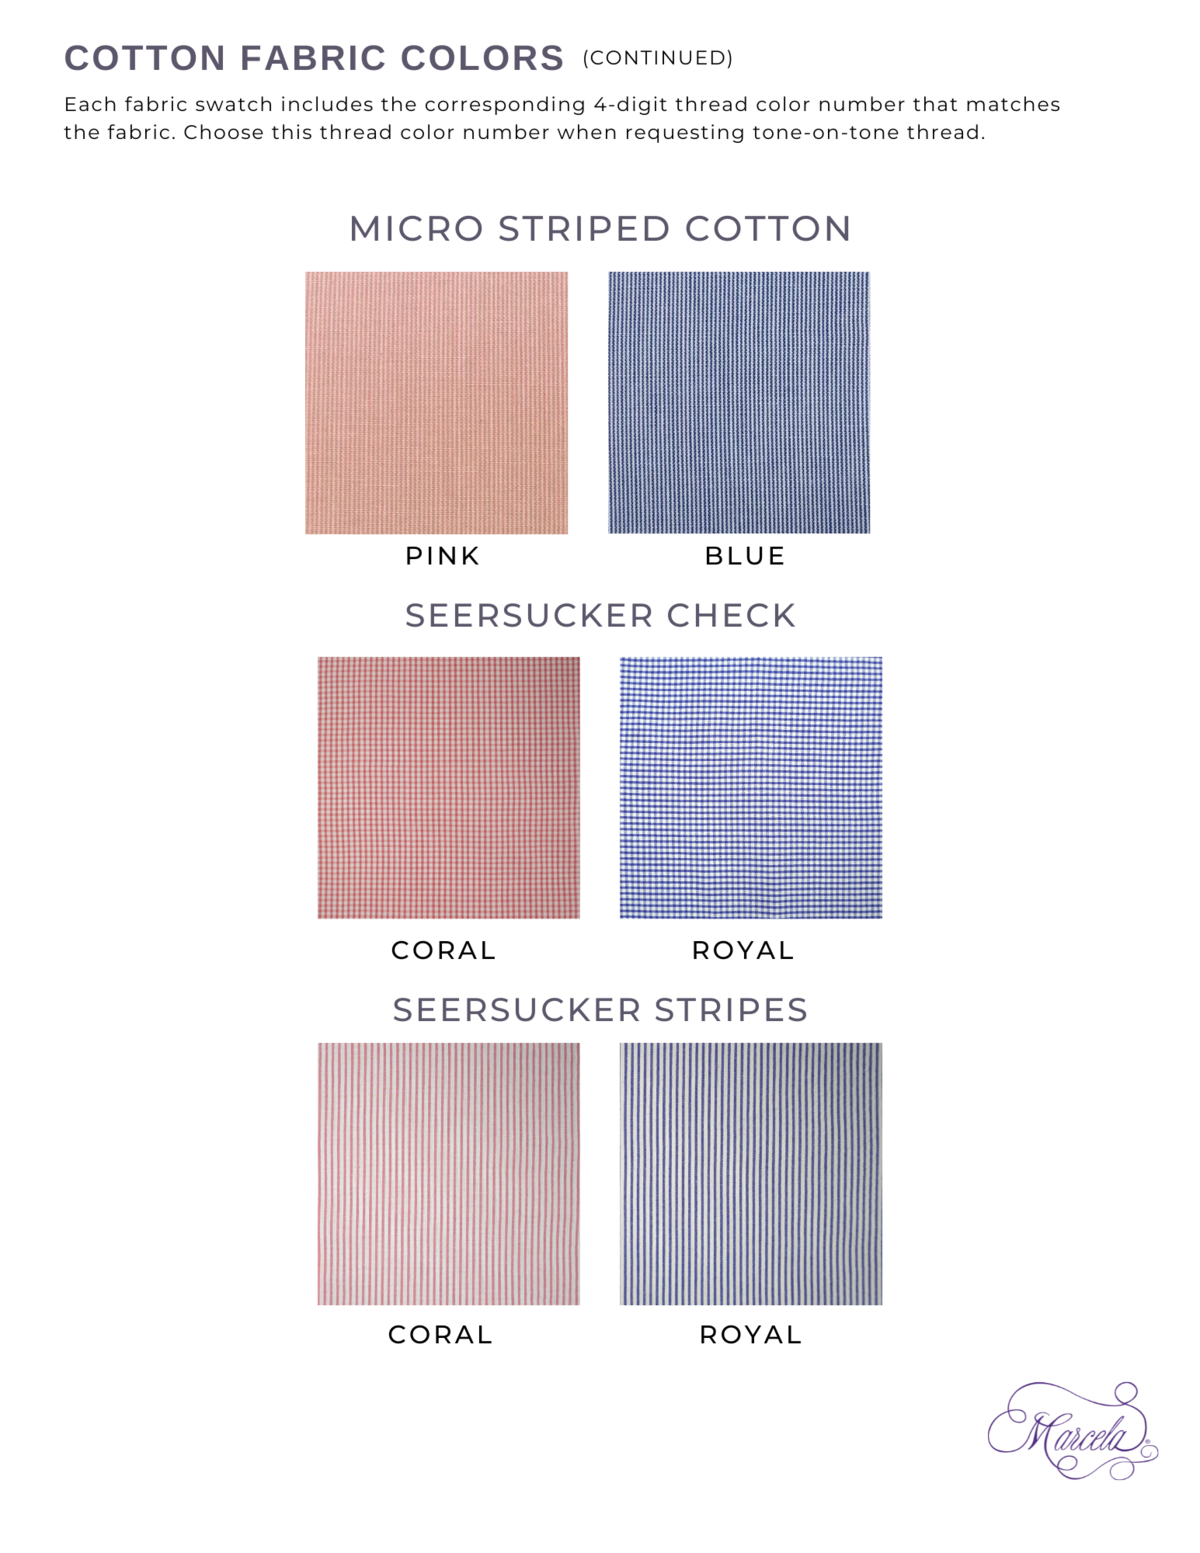 Cotton Colors Continued